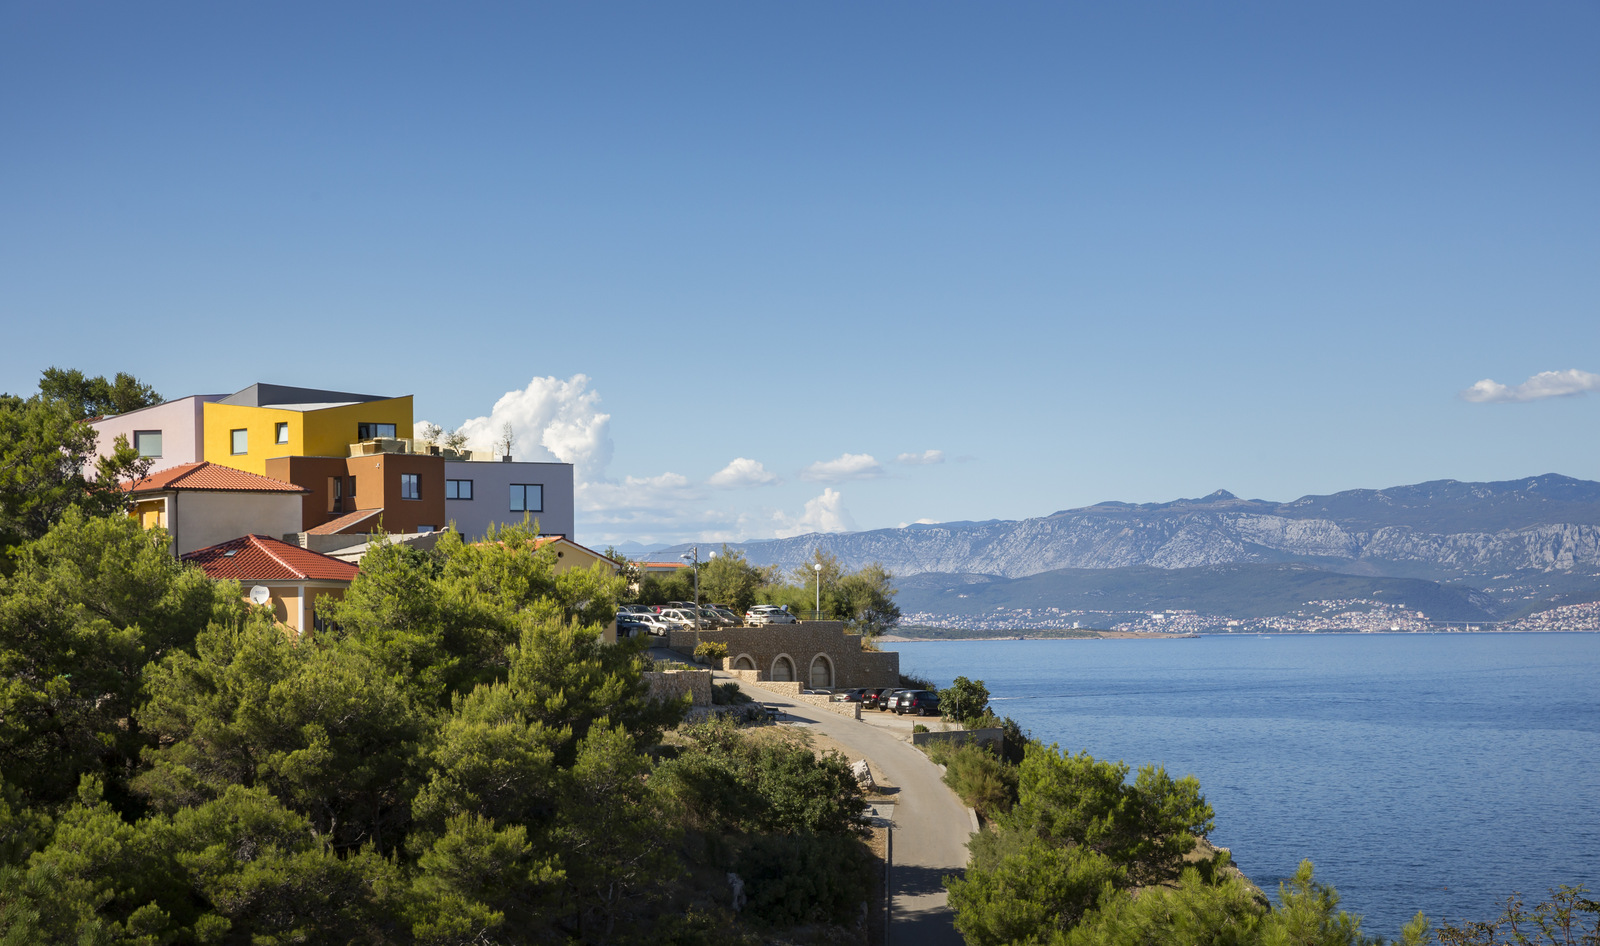 The boutique hotel is situated in an idyllic part of Krk 